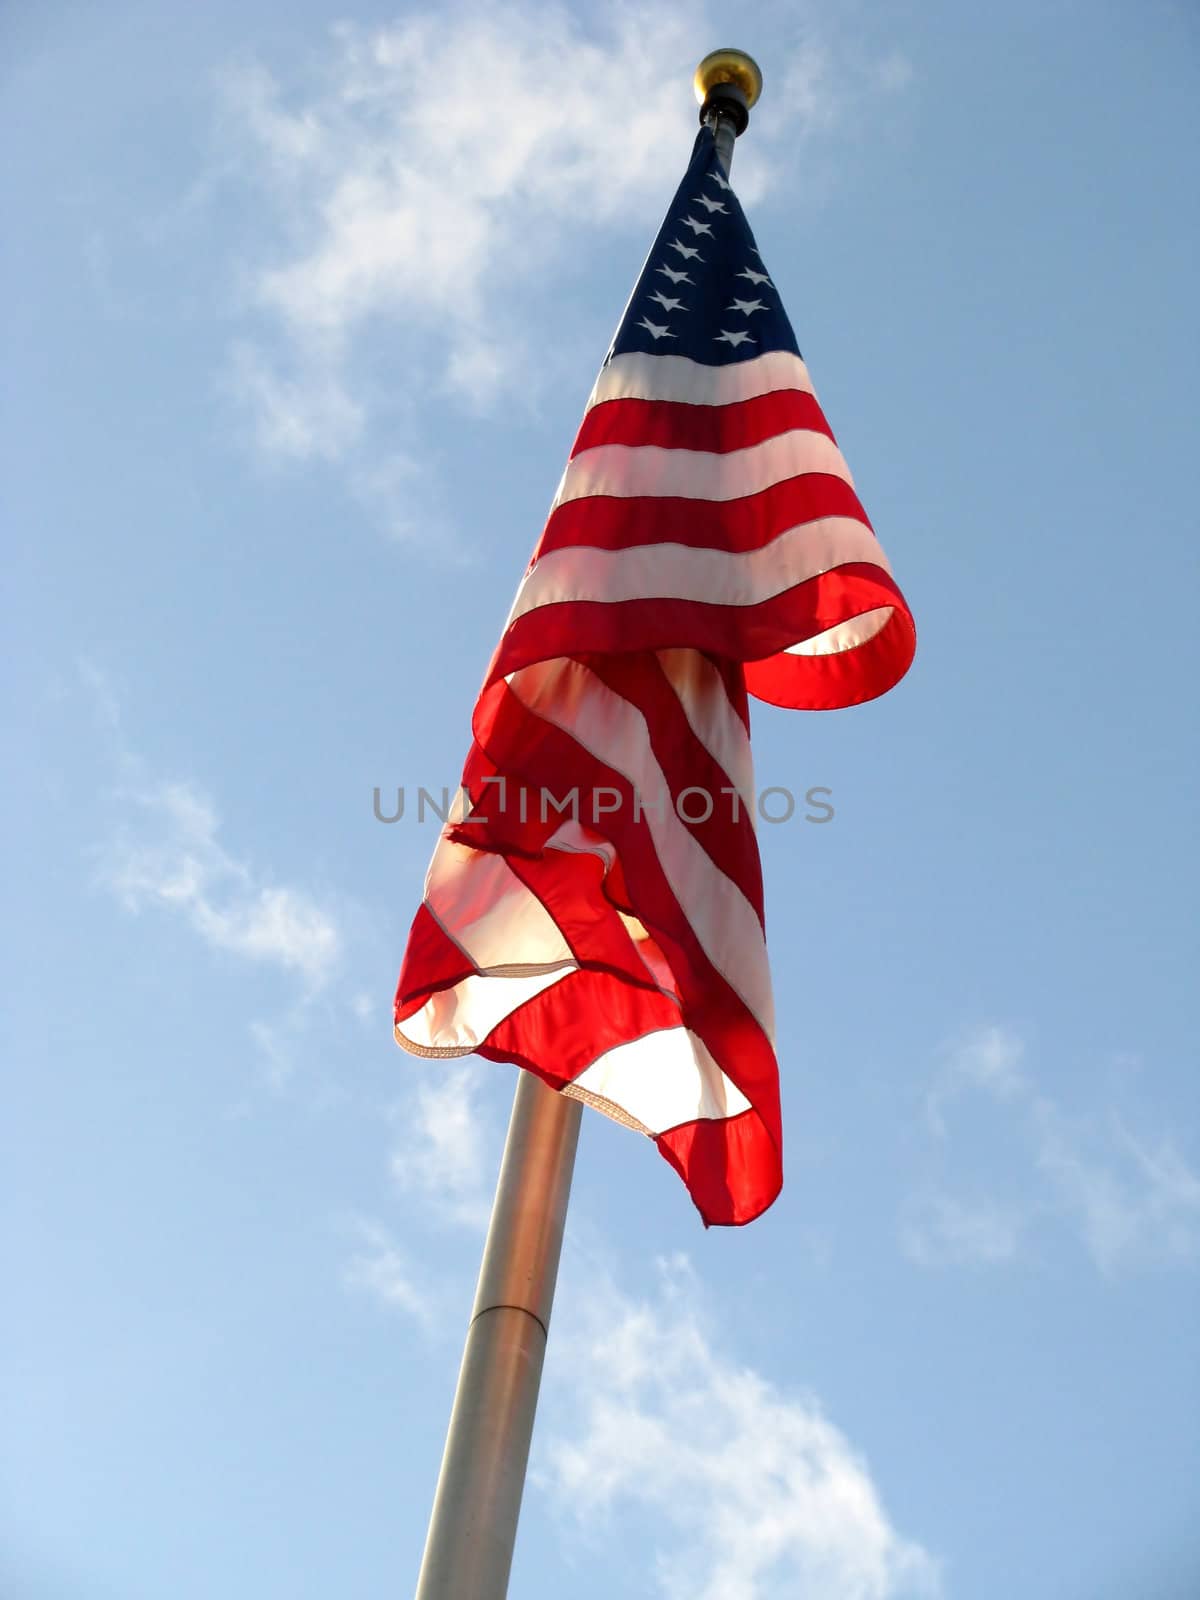 American Flag v2 with Red White and Blue colors set against a blue sky with white clouds.